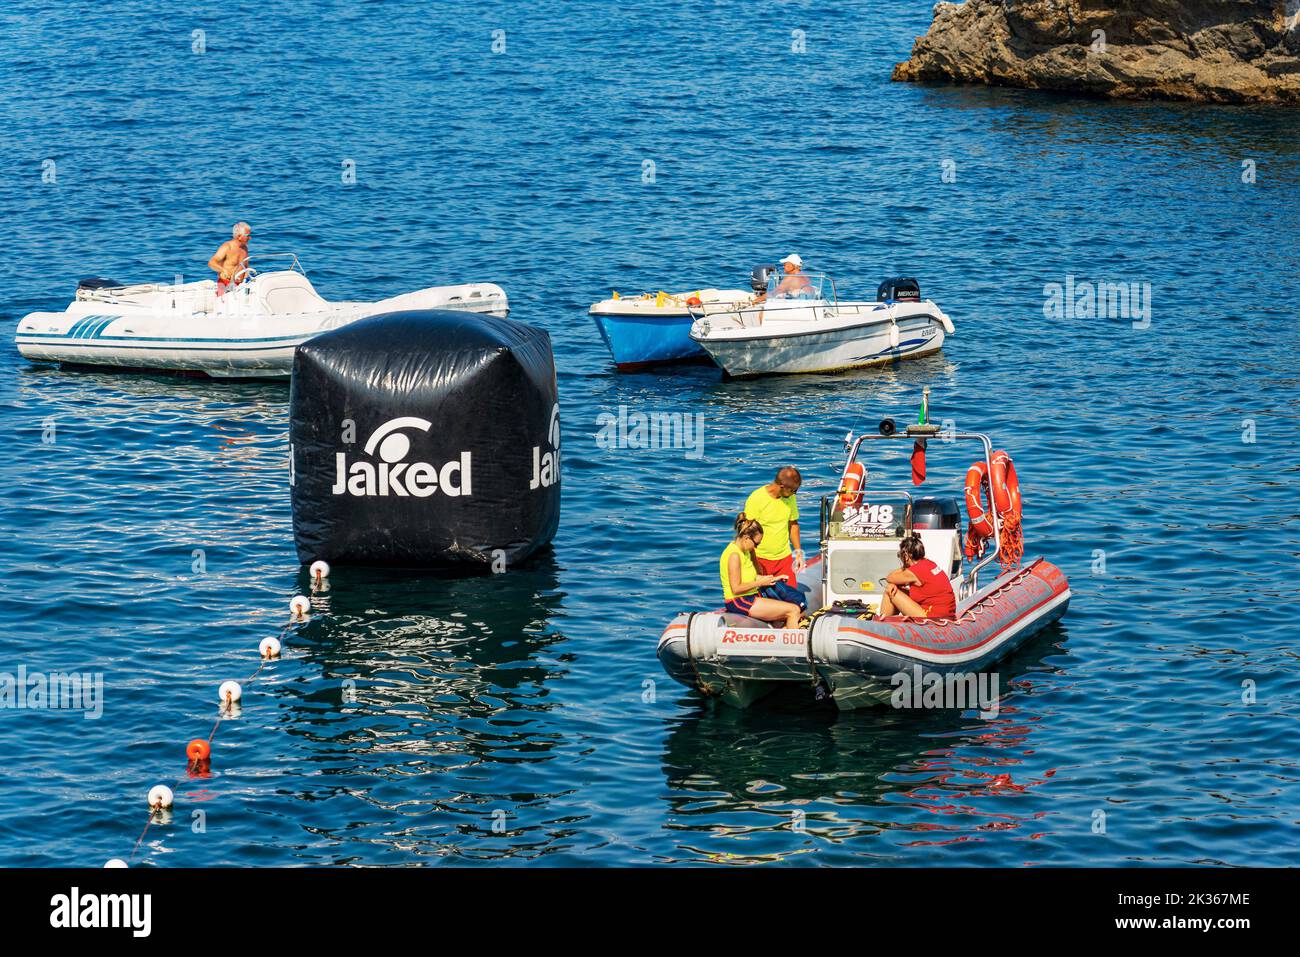 Water ambulance, small motor boat for emergency first aid with people on board in the Mediterranean Sea, Tellaro, Gulf of La Spezia, Liguria, Italy. Stock Photo